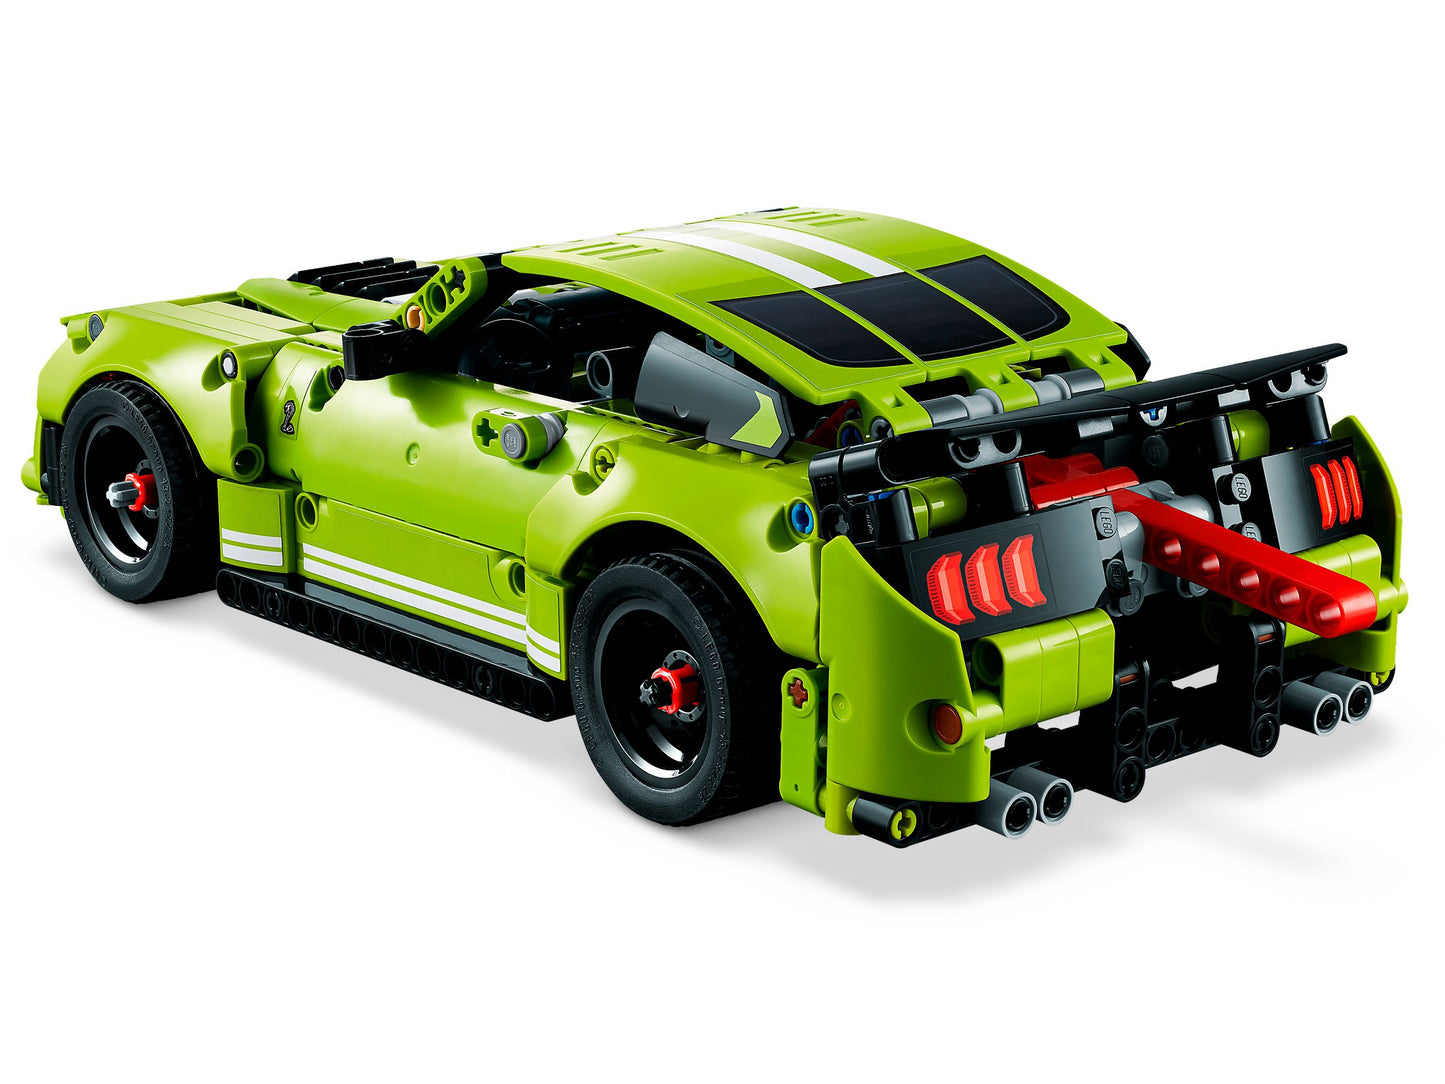 Technic 42138 Ford Mustang Shelby GT500®